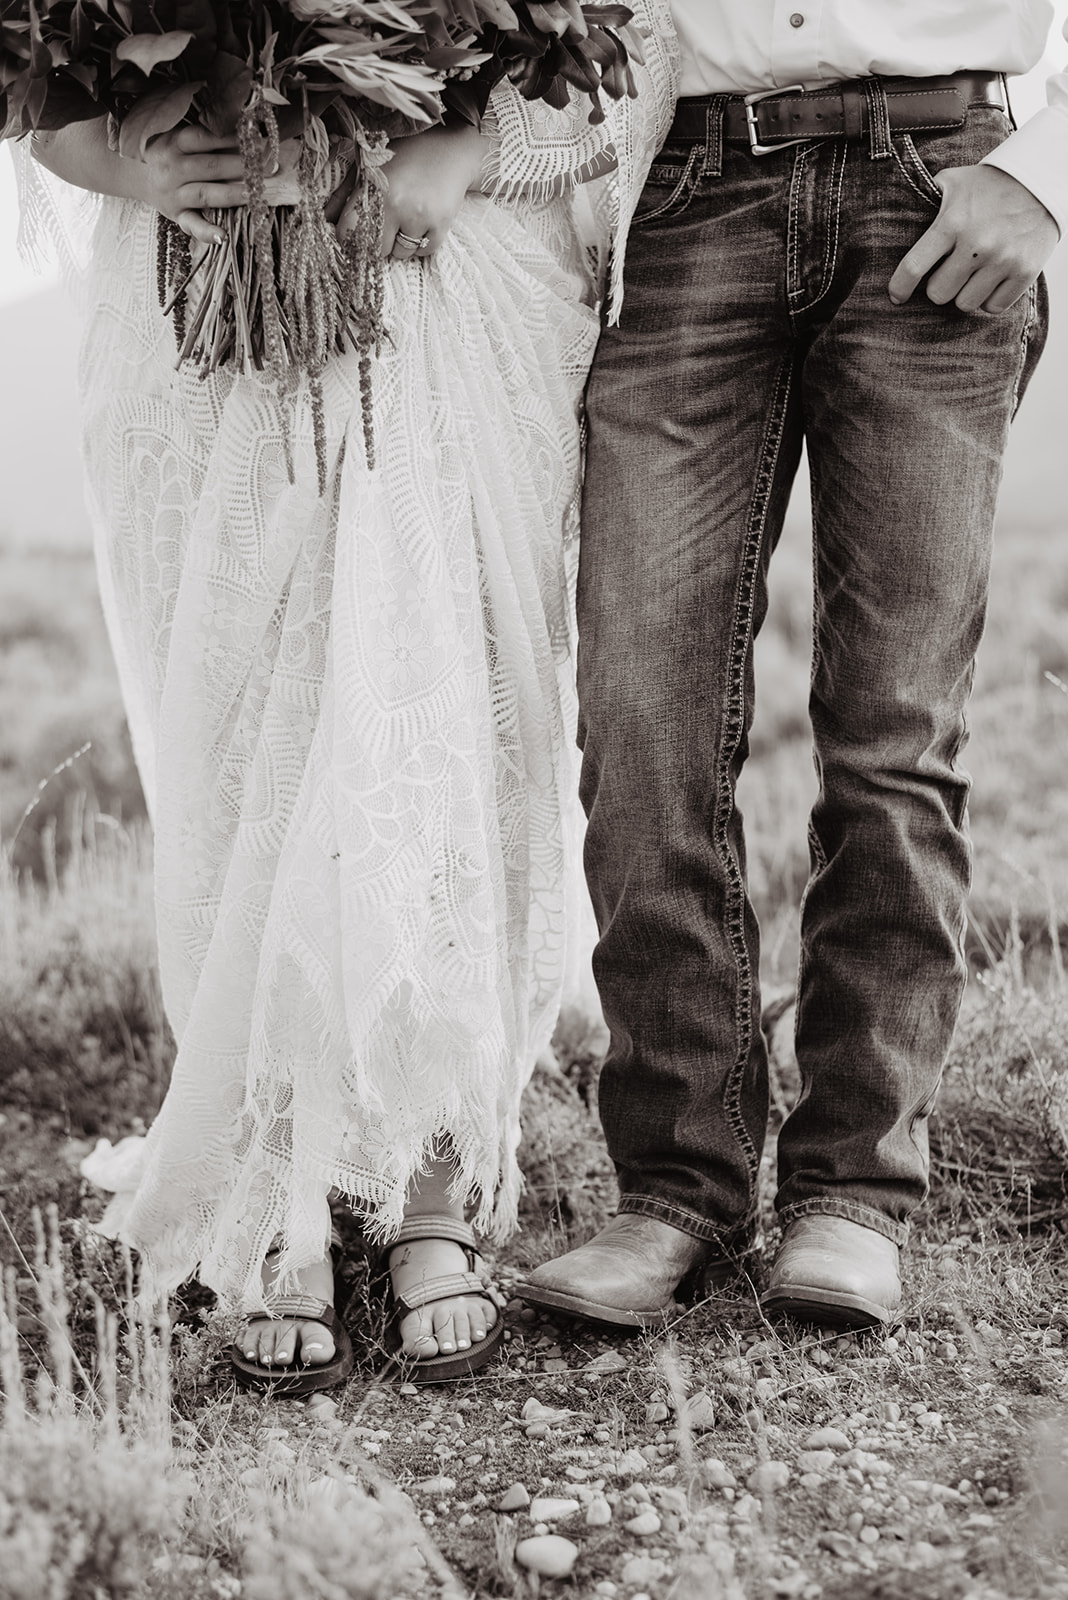 black and white image of man and woman on their wedding day standing in a field, close up of just their legs